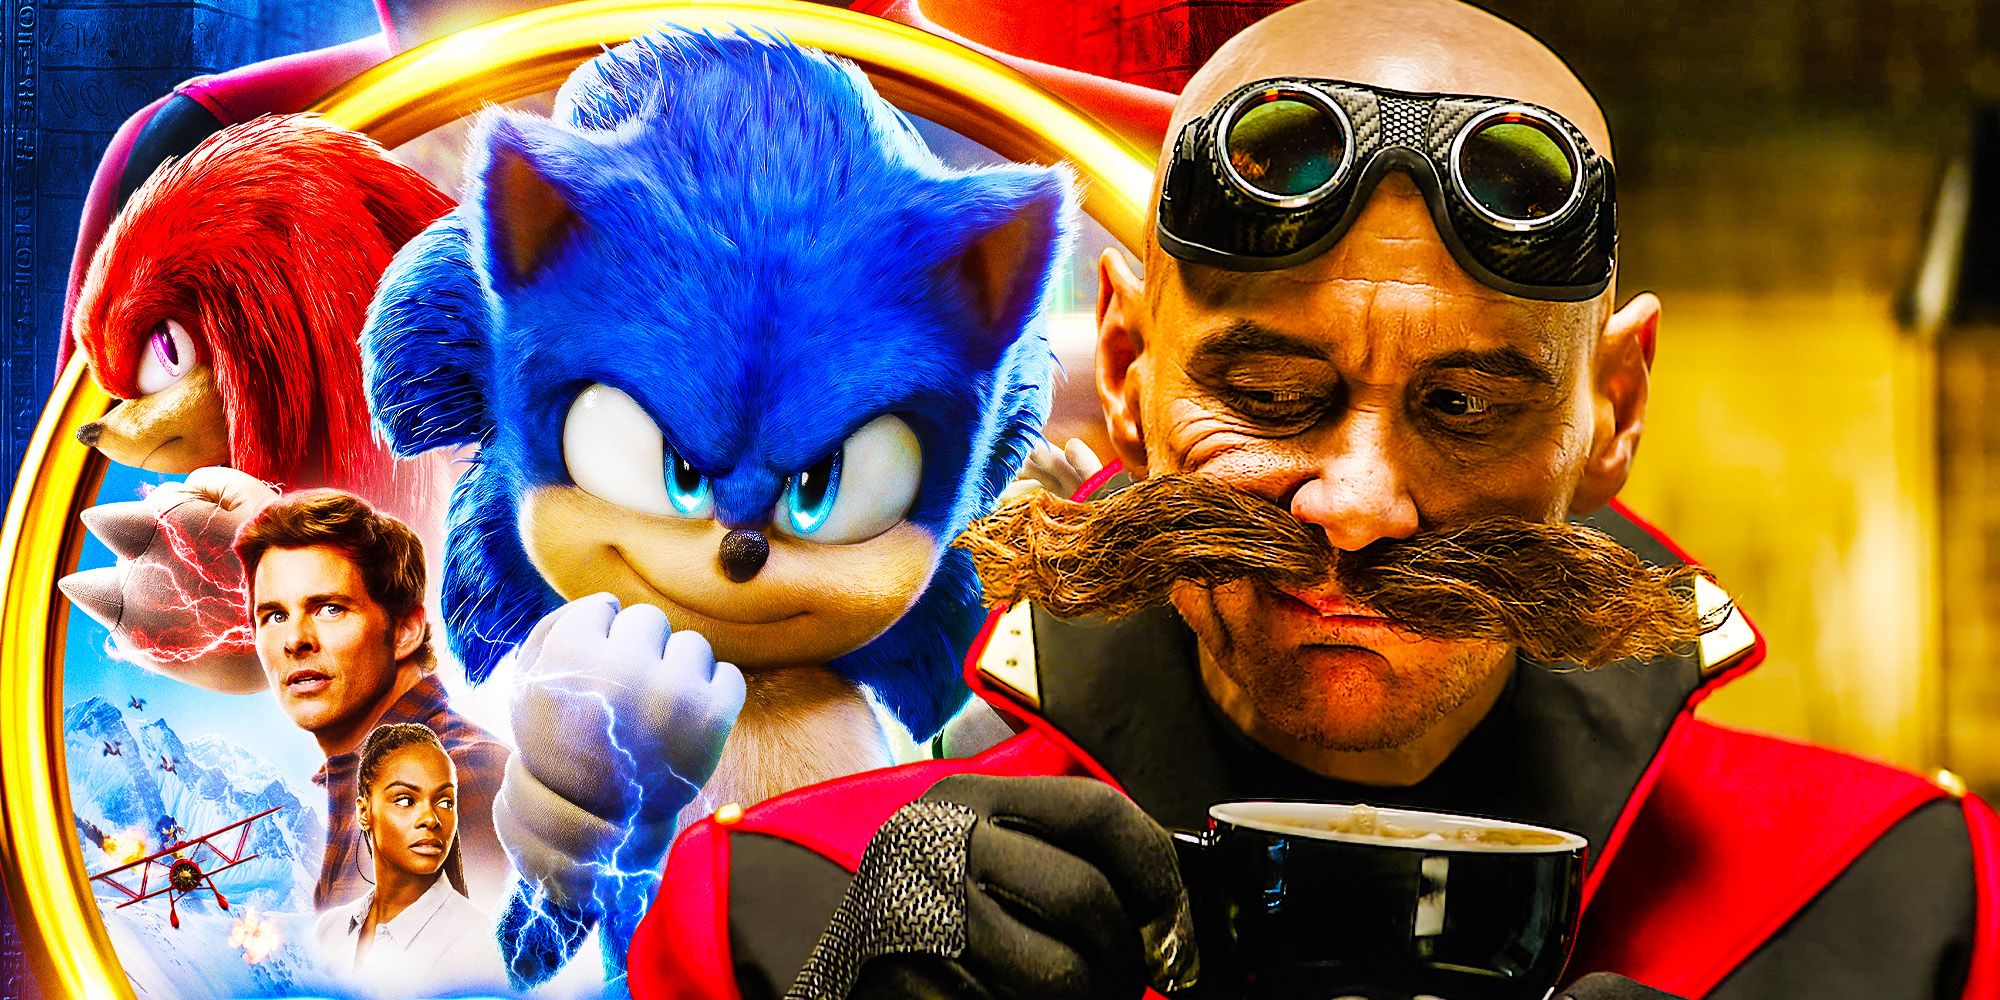 Jim Carrey Online - NEWS  Sonic the Hedgehog 2 Production Start in March  Our fast and fury, favorite blue hedgehog is back! Soon the production for  the sequel will begin. We